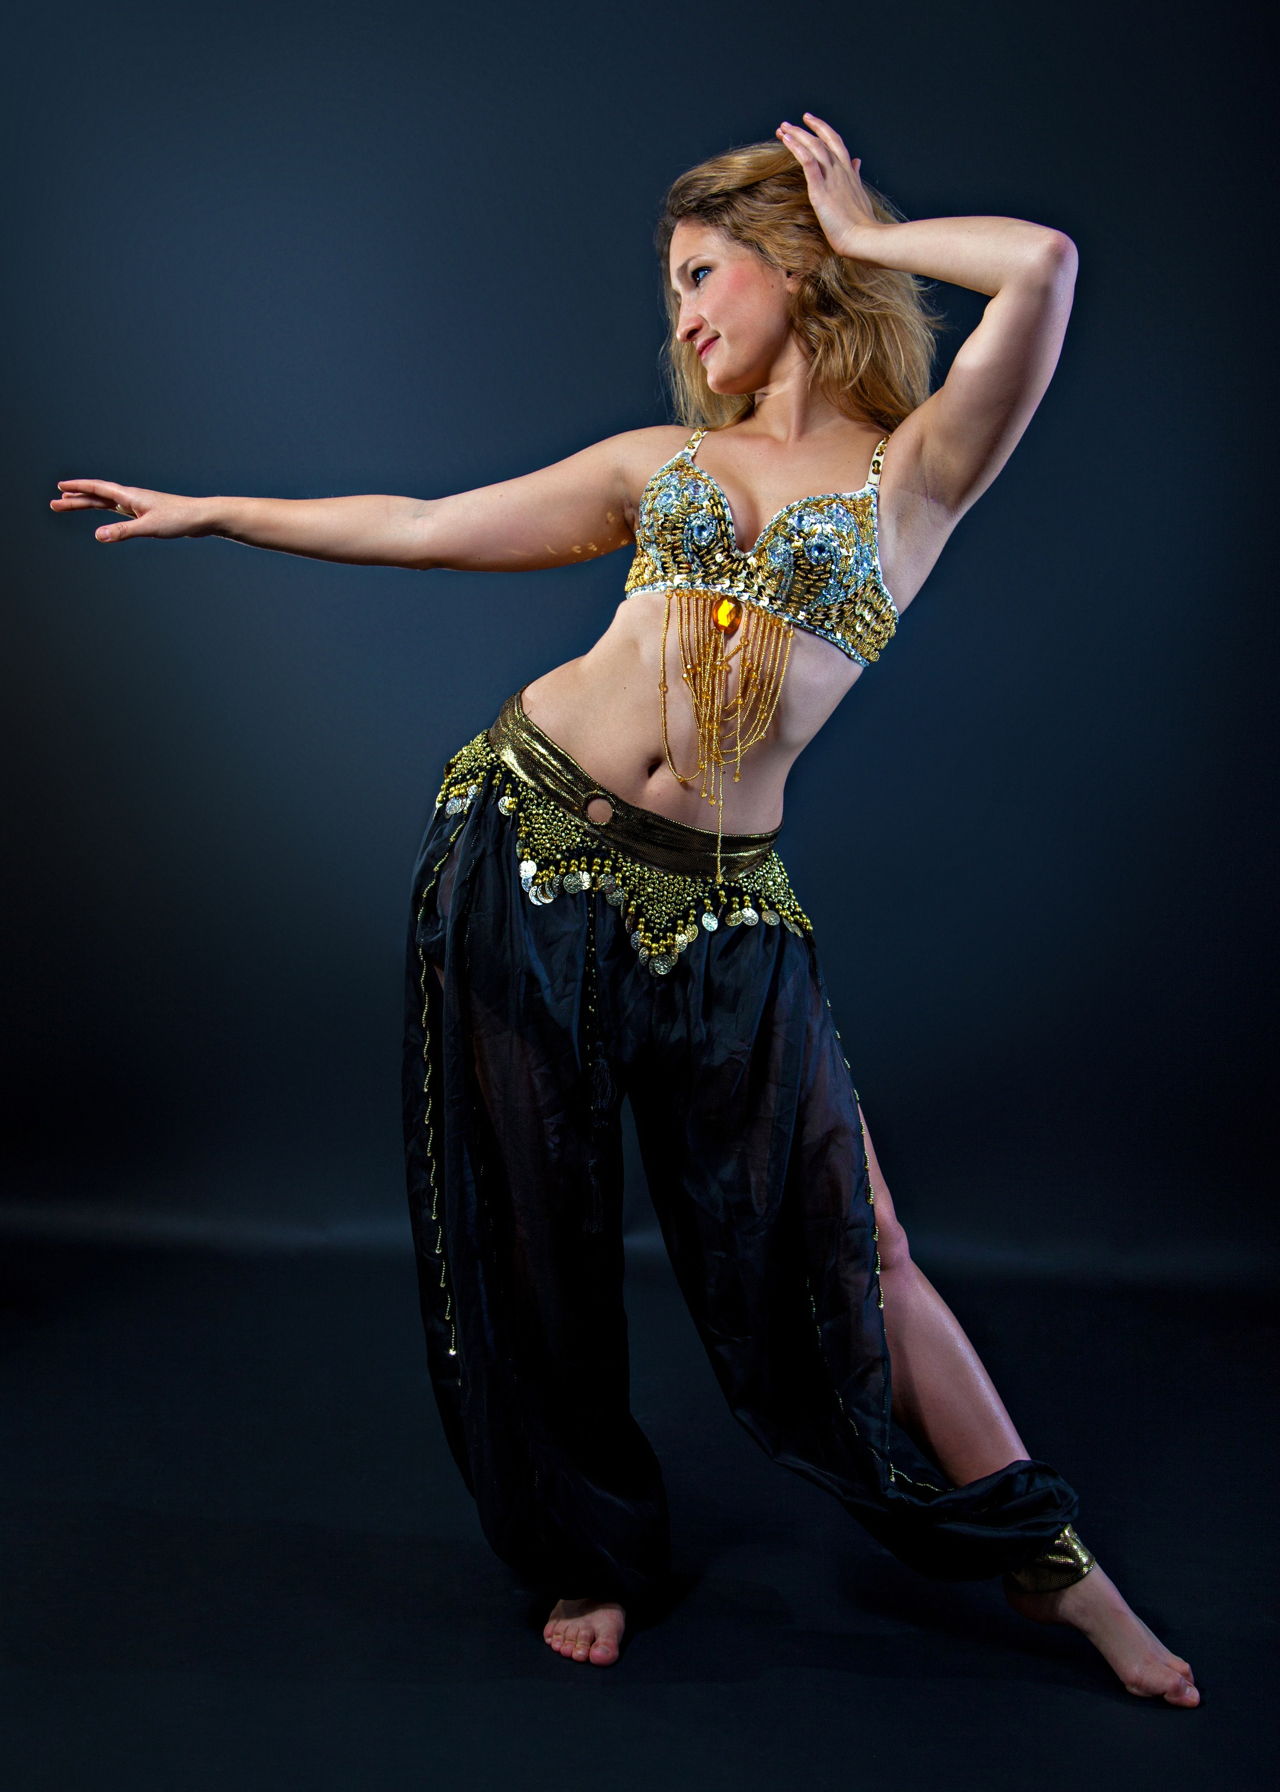 3 Easy Steps to Make a Gorgeous Belly Dance Costume at Home